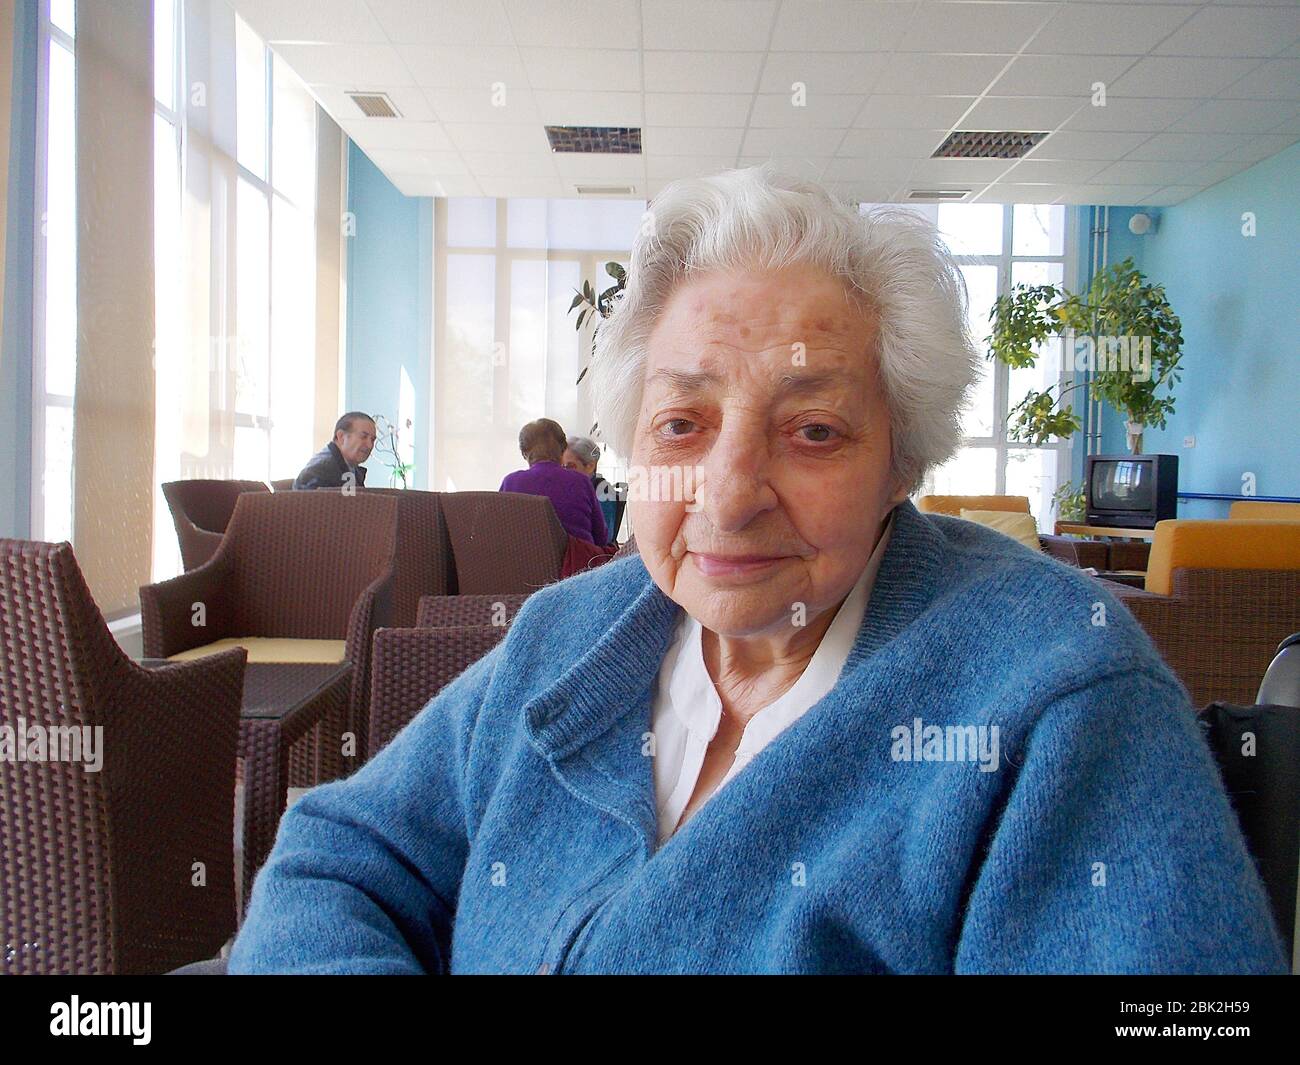 Old lady in a nursing home, smiling and looking at the camera. Stock Photo